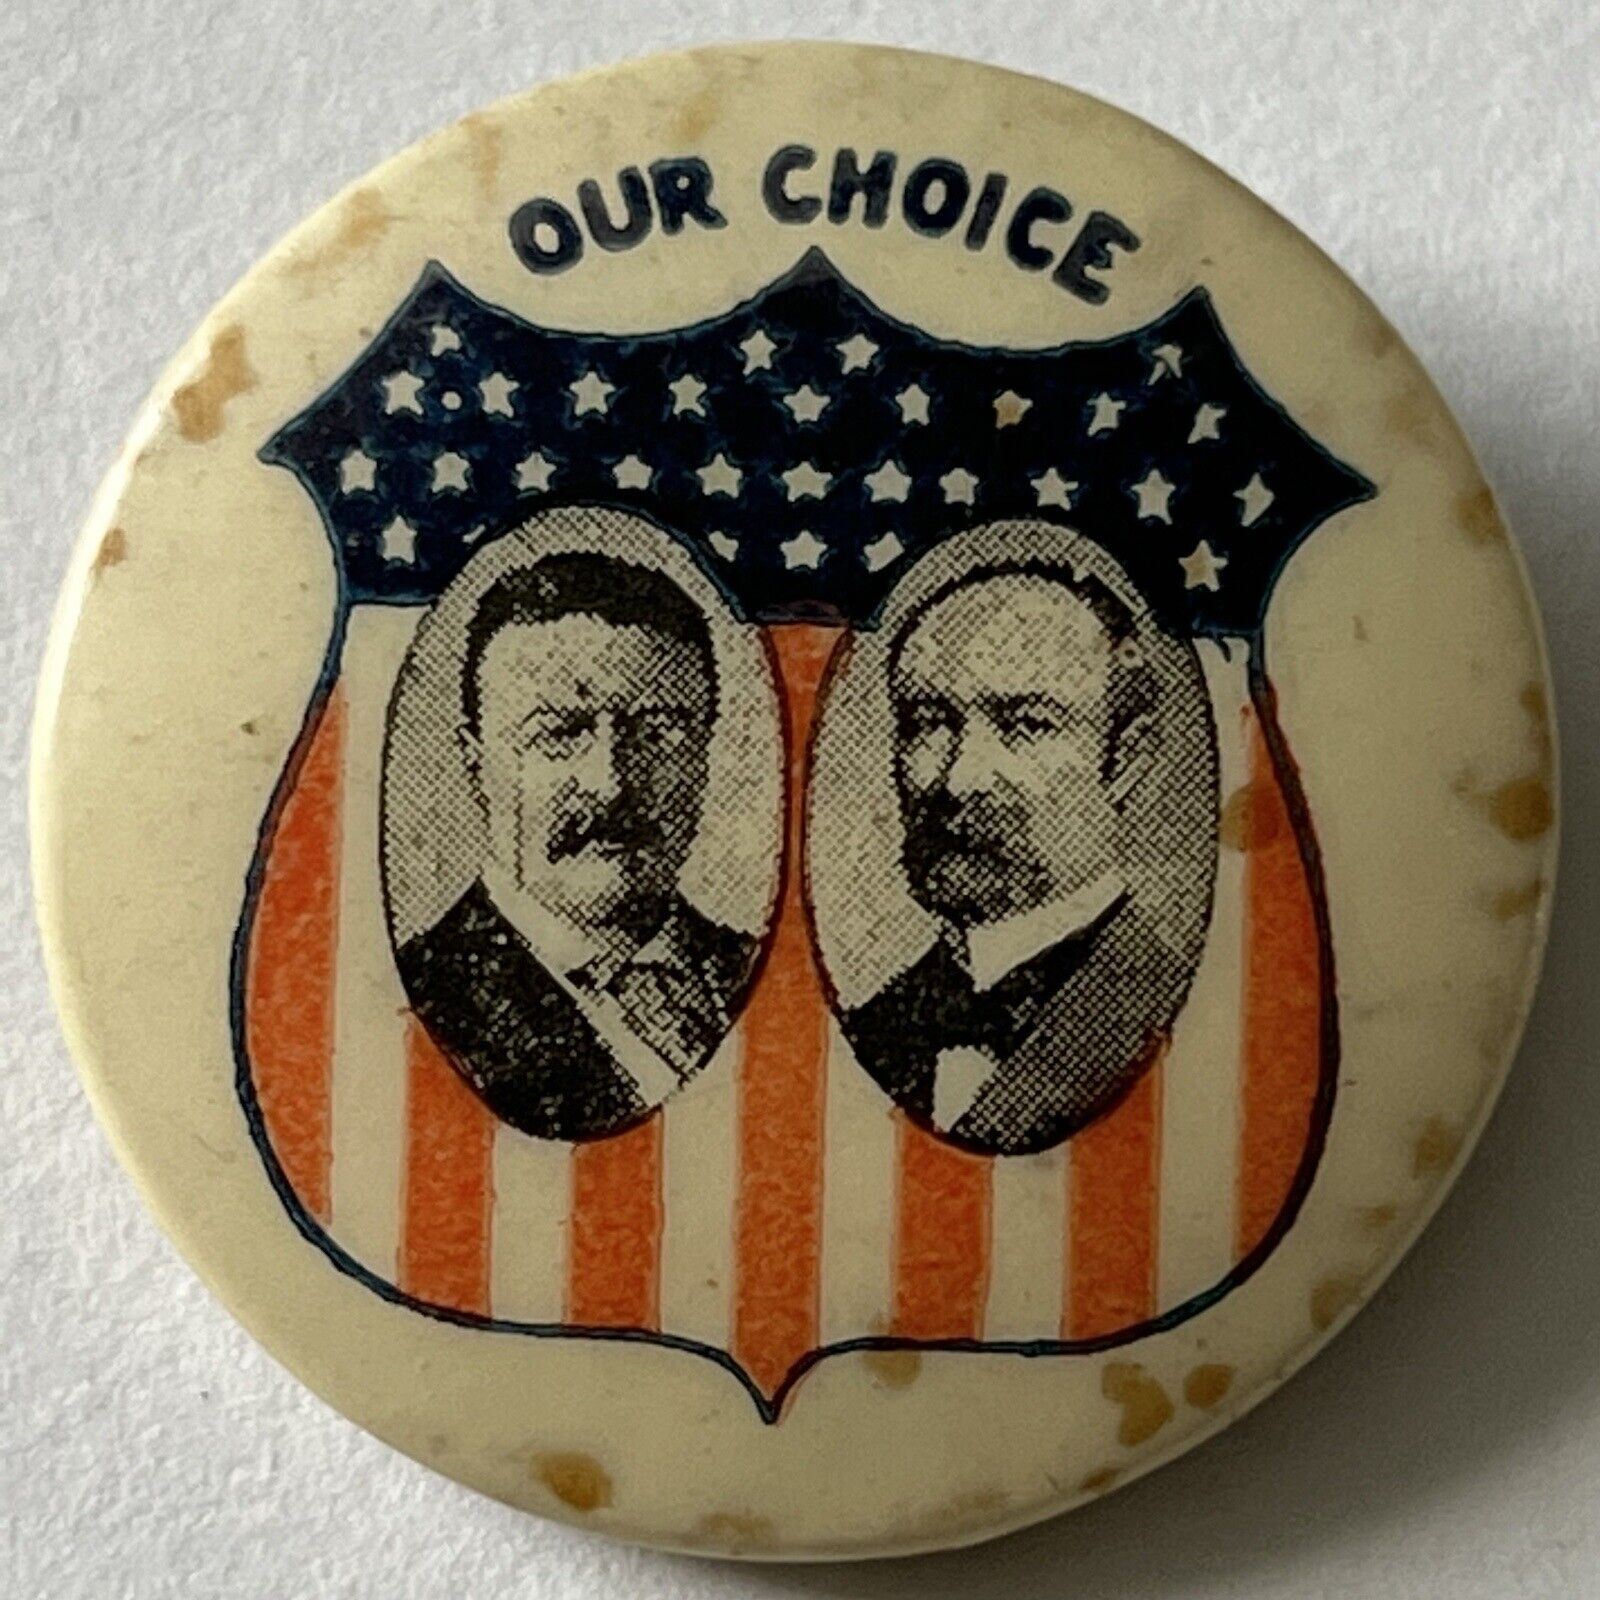 Antique TEDDY ROOSEVELT & FAIRBANKS Political Campaign Pin Our Choice